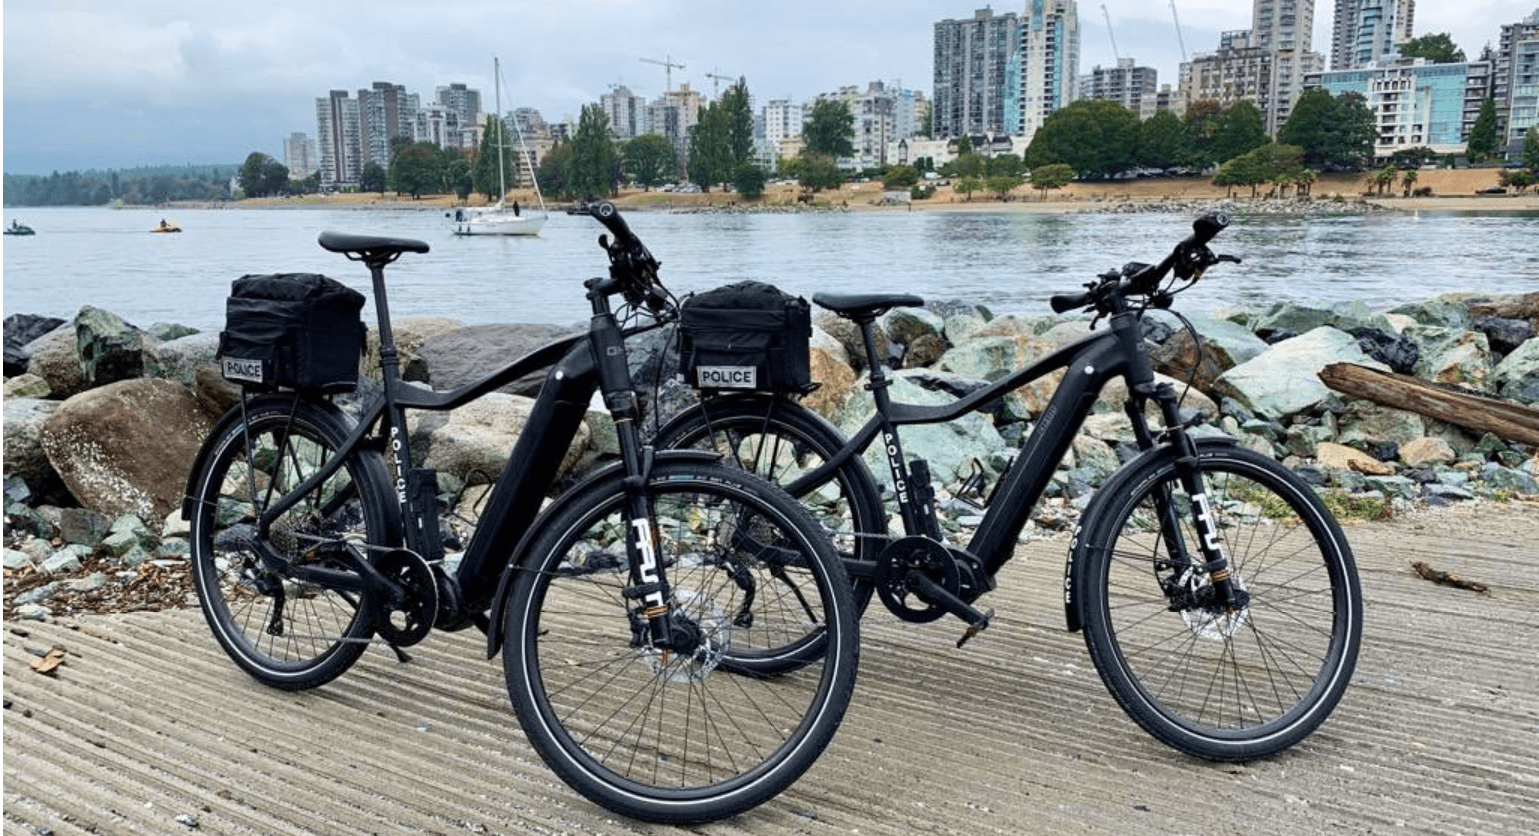 OHM Supplies Vancouver Police Department with E-Bikes for Pilot Project